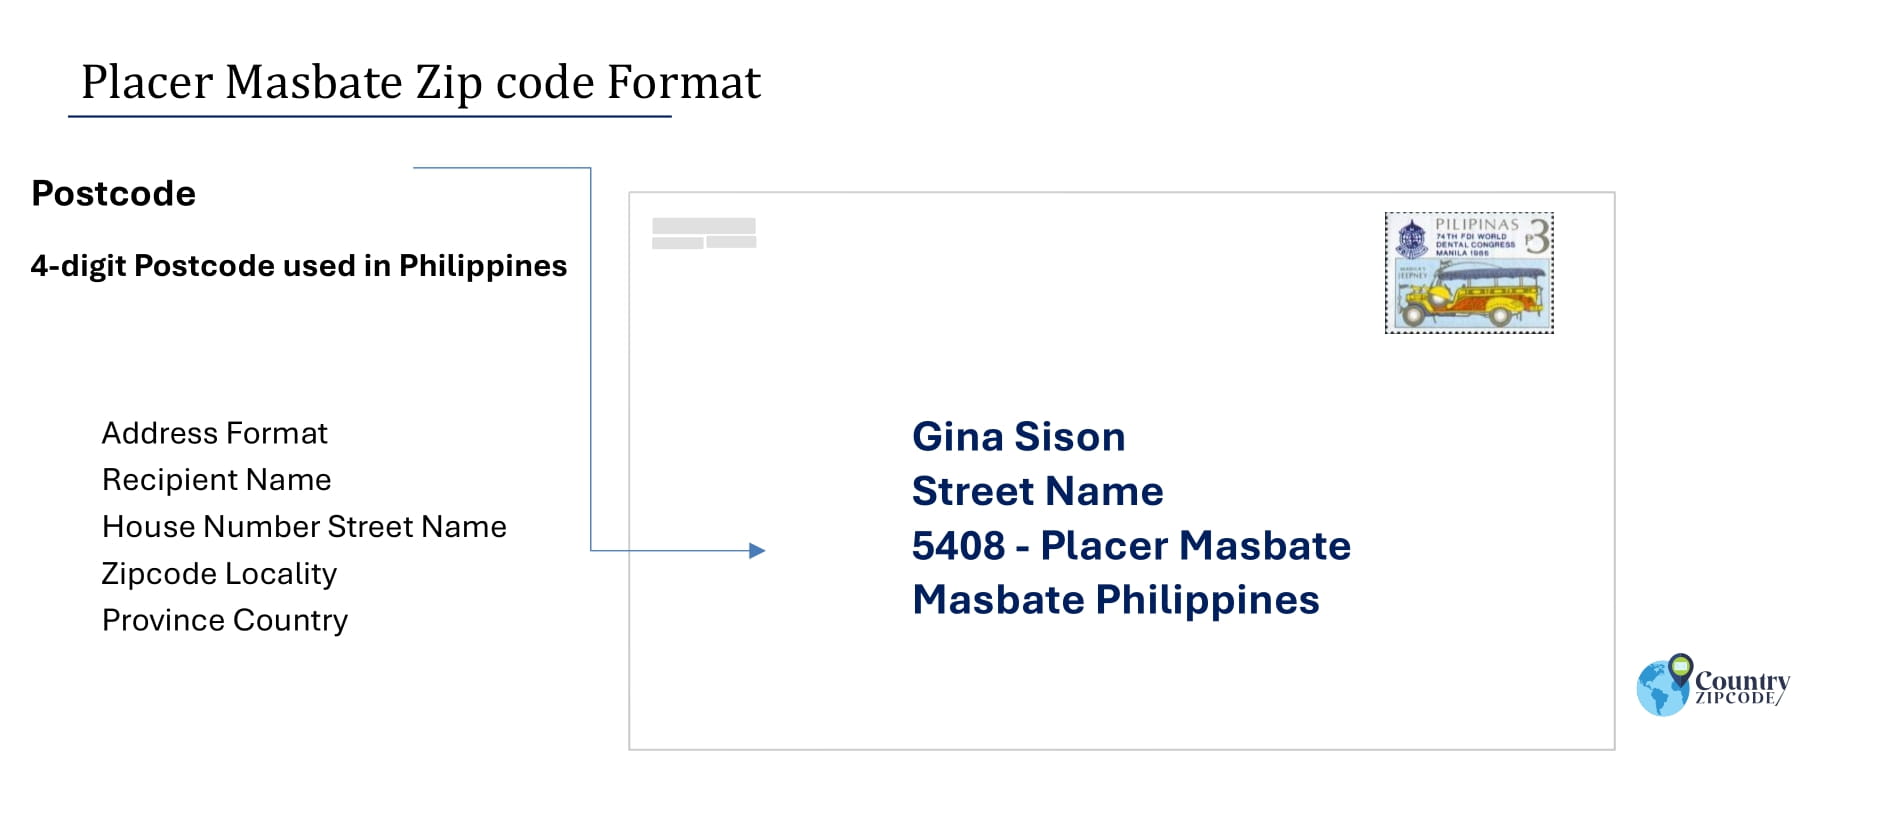 example of Placer Masbate Philippines zip code and address format